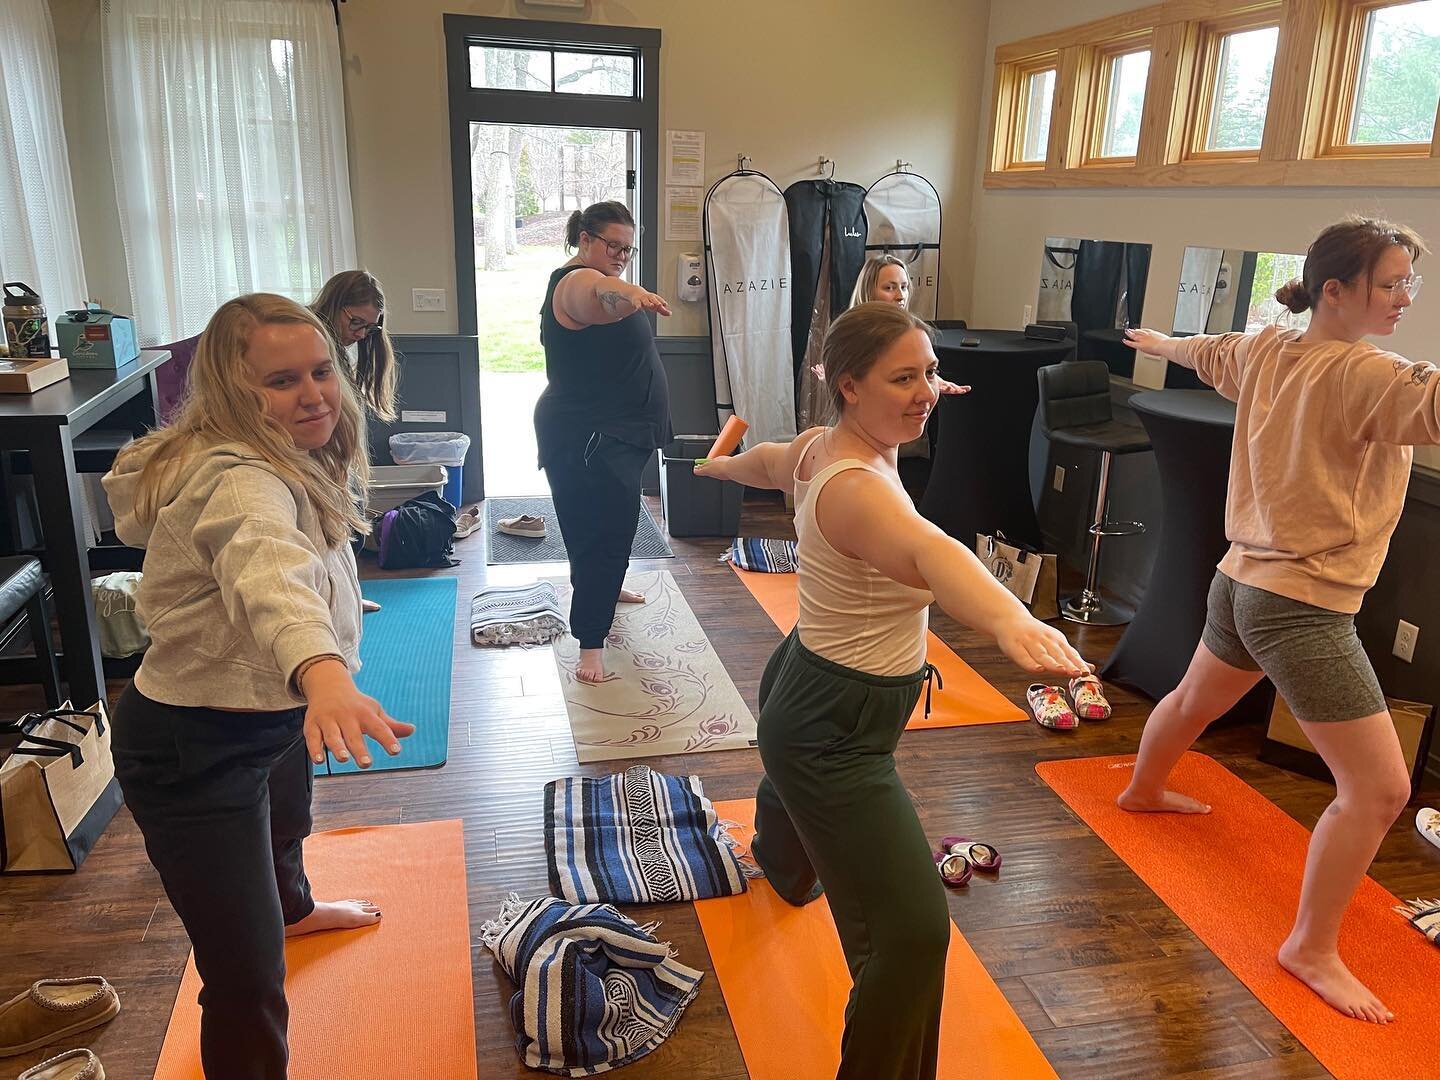 Bride Greta and her glam squad started their day today with our Wedding Day Guided Yoga 🧘&zwj;♀️ 

Start your new journey centered with WPI&rsquo;s Bridal Yoga Flow 🙏🏼 

🧘&zwj;♀️🧘&zwj;♀️ https://www.warpaintinternational.com/yoga-for-weddings

#